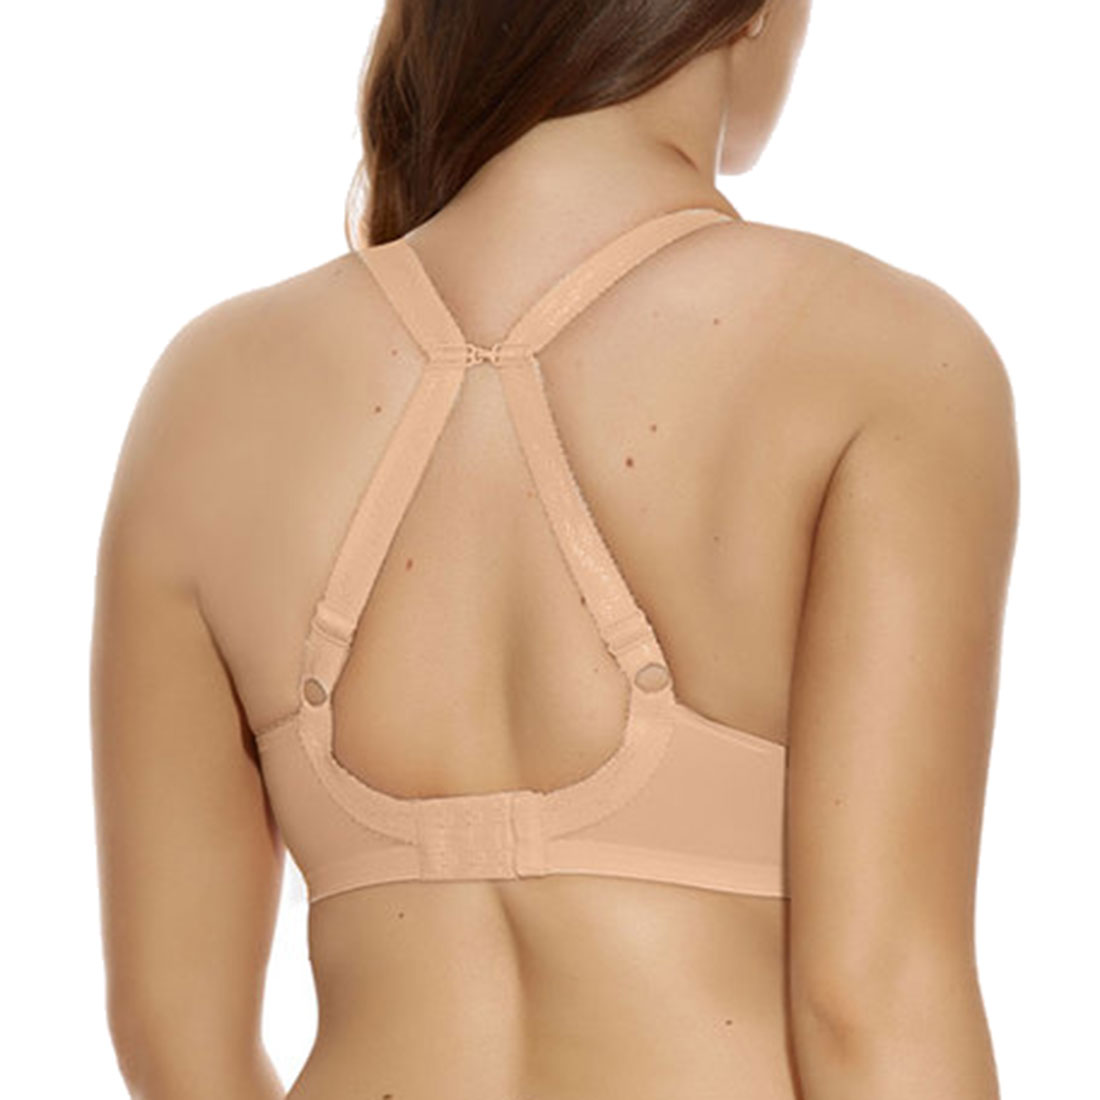 Elomi Womens Energise Underwire Sports Bra with J Hook, 42H, Nude